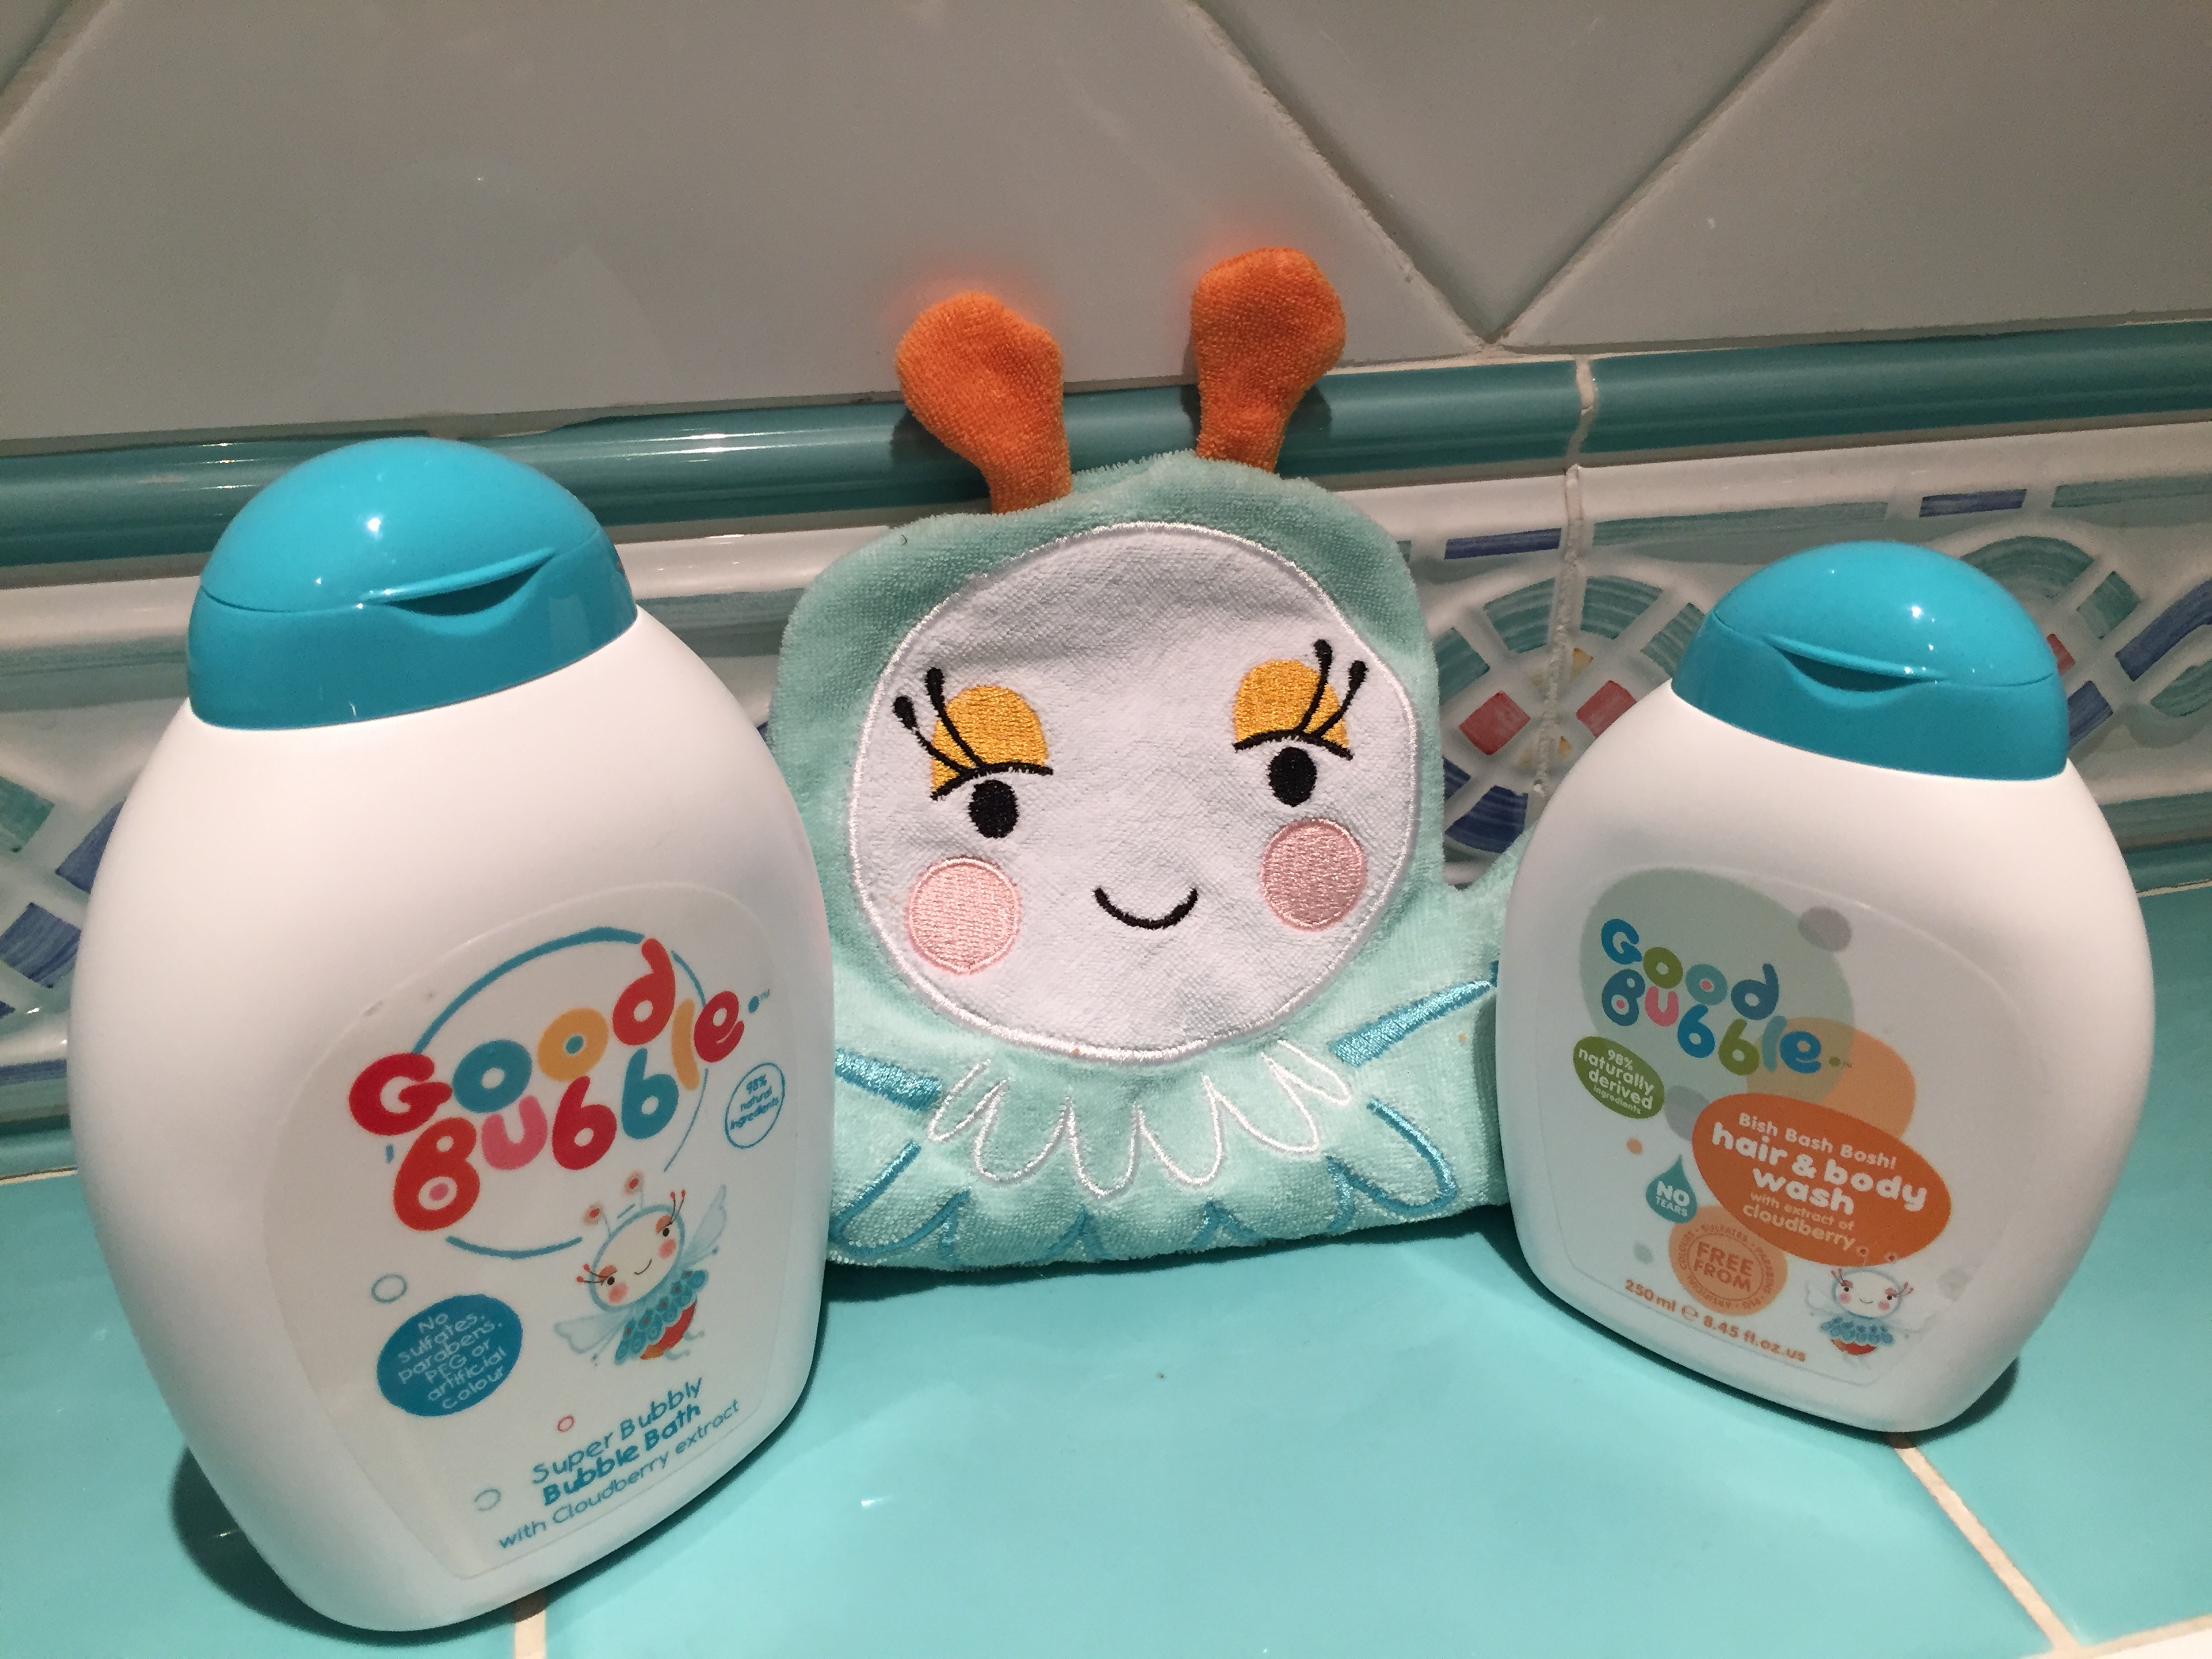 Of course one of the key things to remember about toddlers and bad weather is that they will get mucky! Good Bubble not only gets your little ones clean and smelling good again but it's also made from natural ingredients.